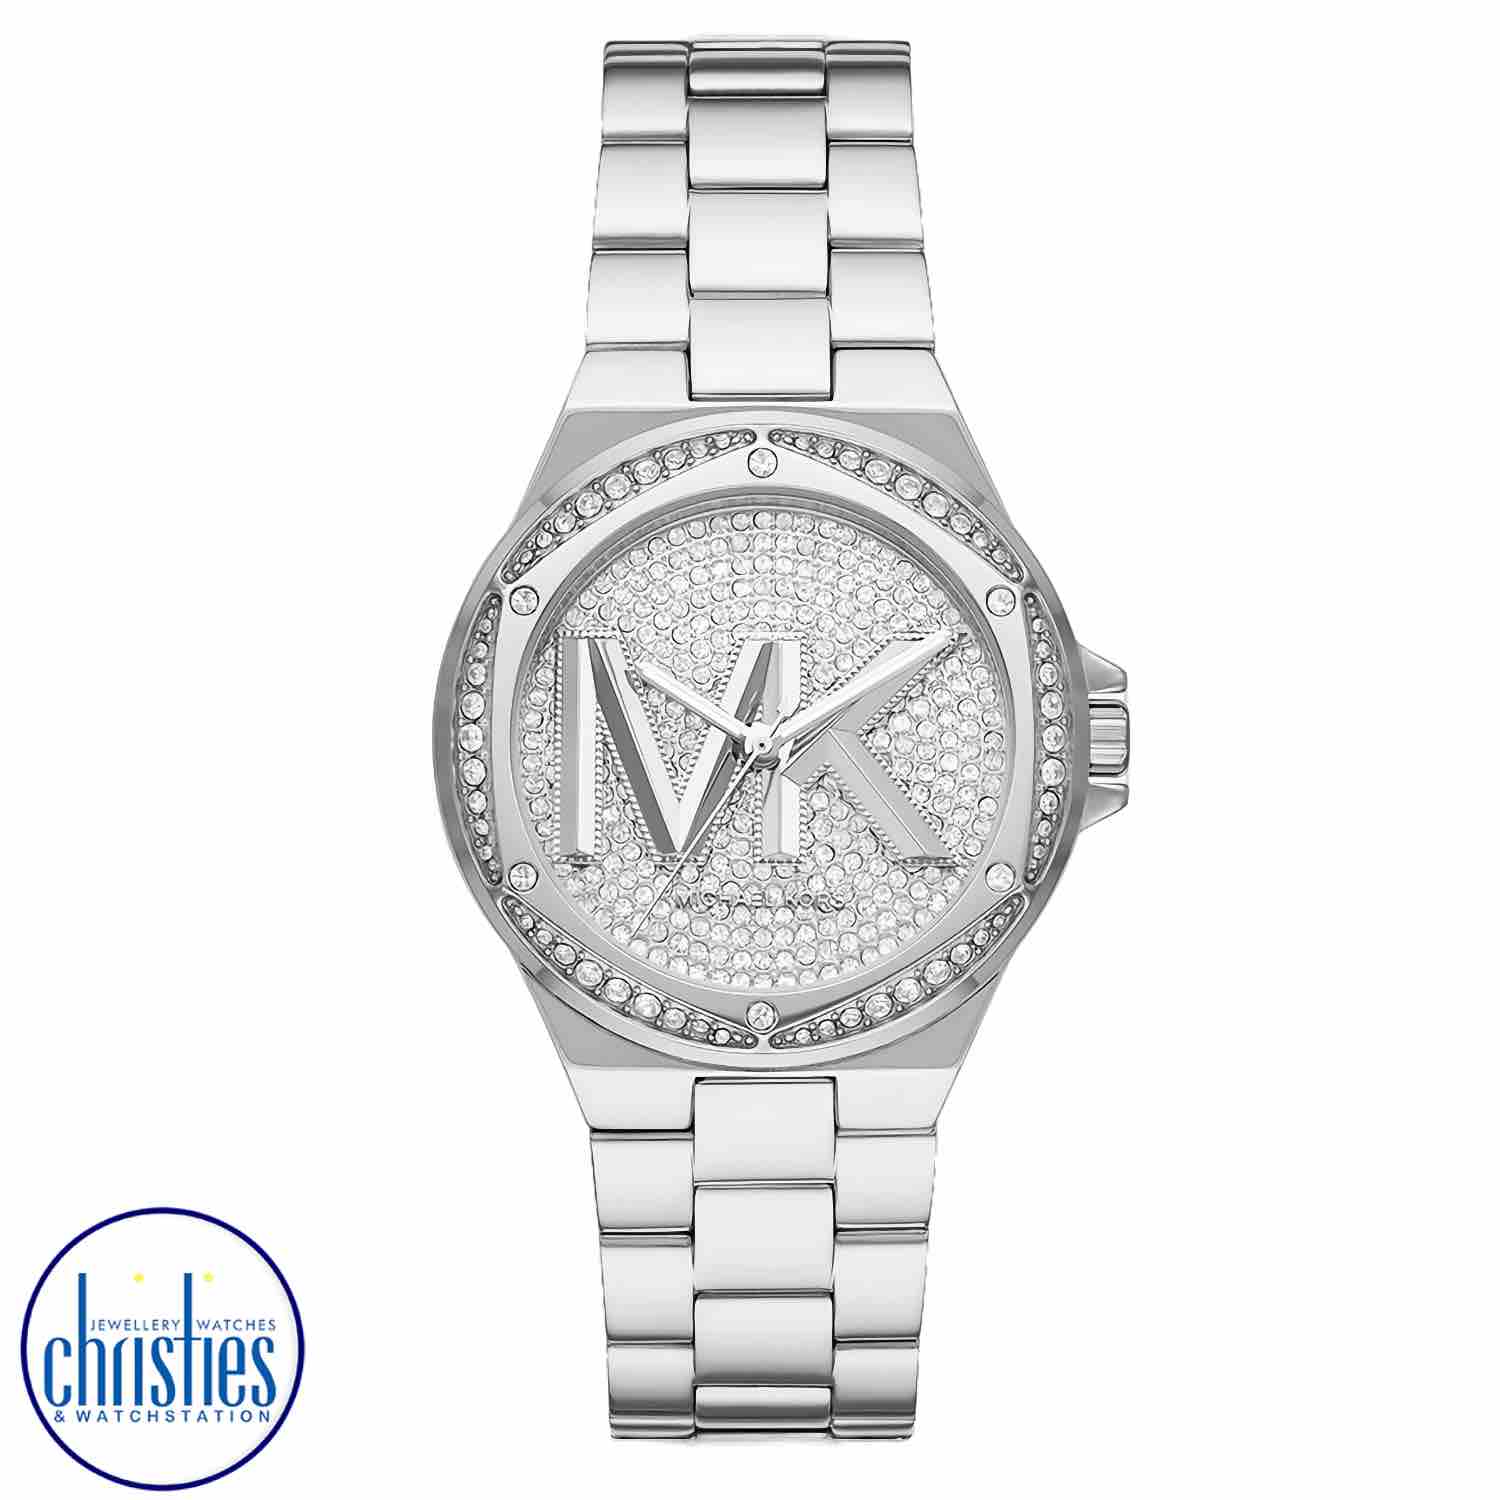 MK4708 Michael Kors Harlowe Stainless Steel Watch. MK4708 Michael Kors Lennox Three-Hand Stainless Steel WatchAfterpay - Split your purchase into 4 instalments - Pay for your purchase over 4 instalments, due every two weeks.